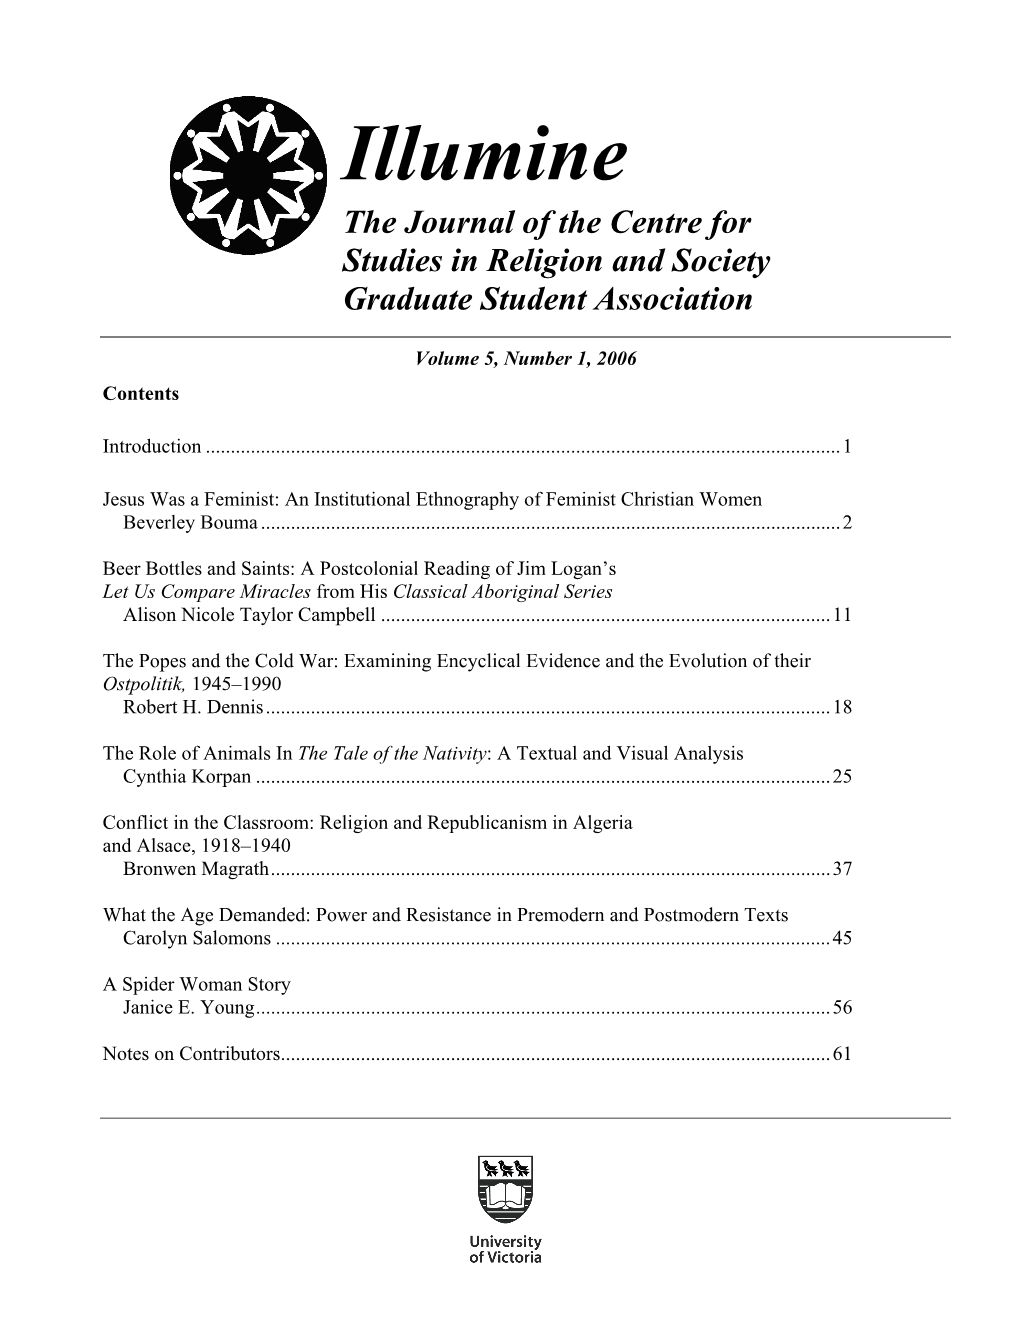 Illumine the Journal of the Centre for Studies in Religion and Society Graduate Student Association